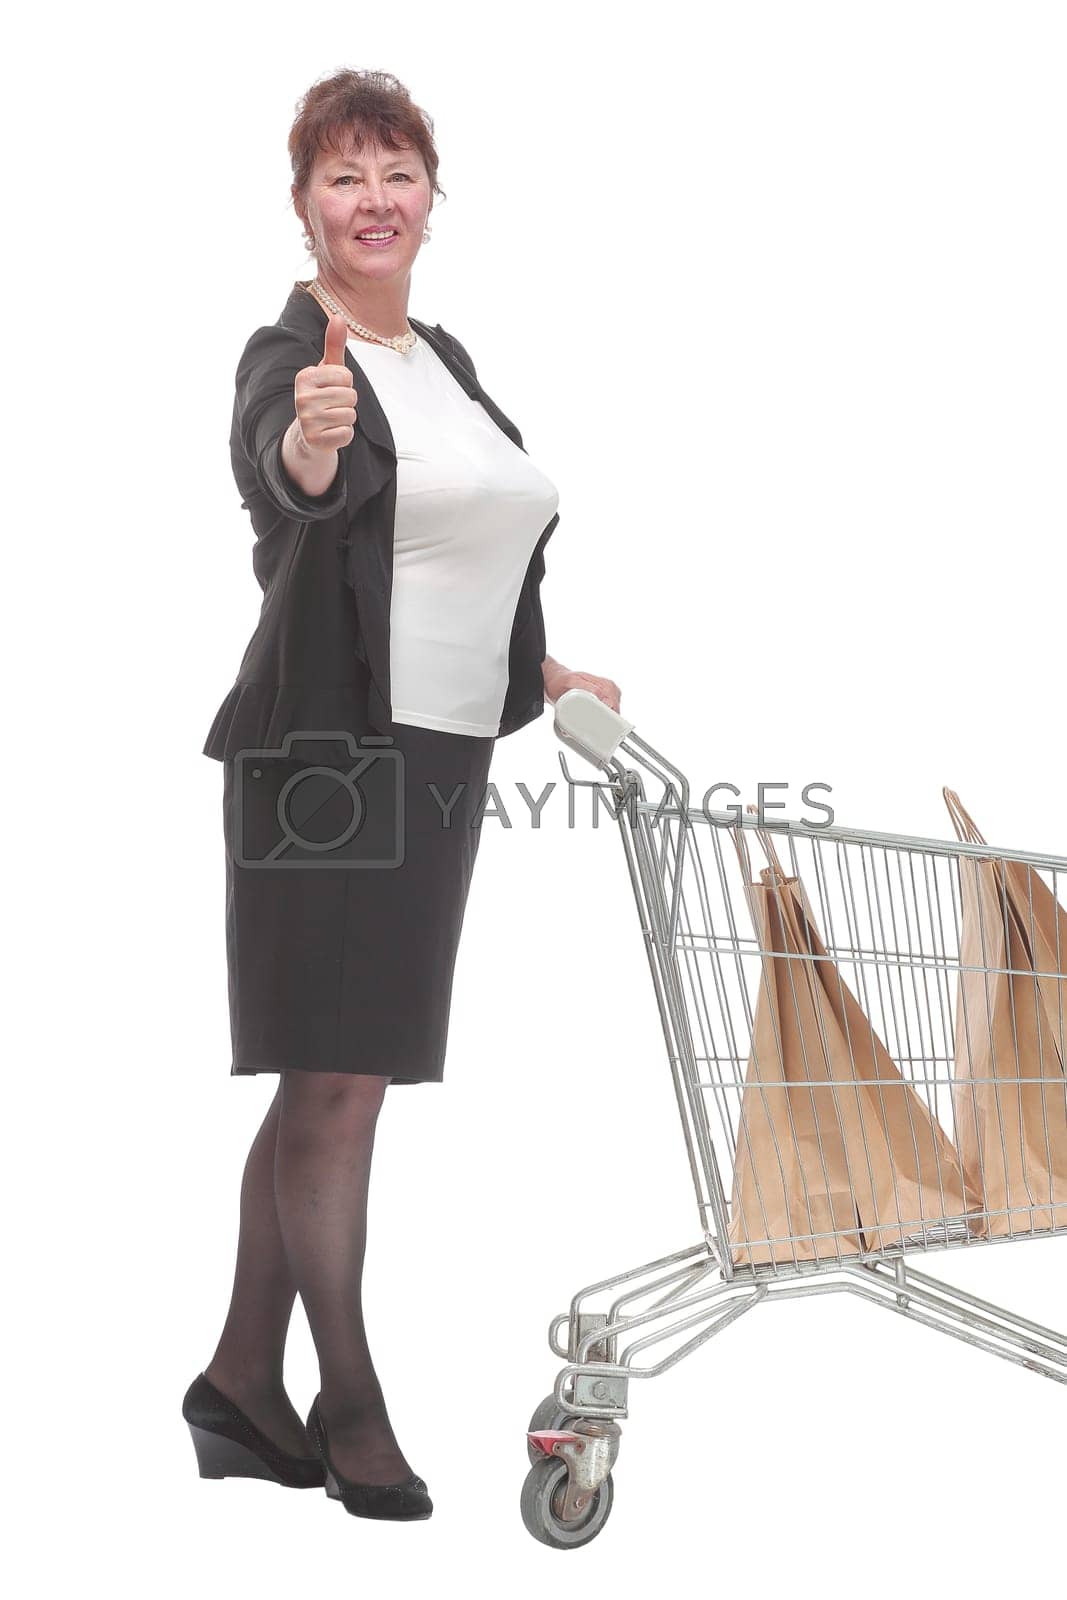 Royalty free image of Full length portrait of a woman pushing a shopping trolley by asdf